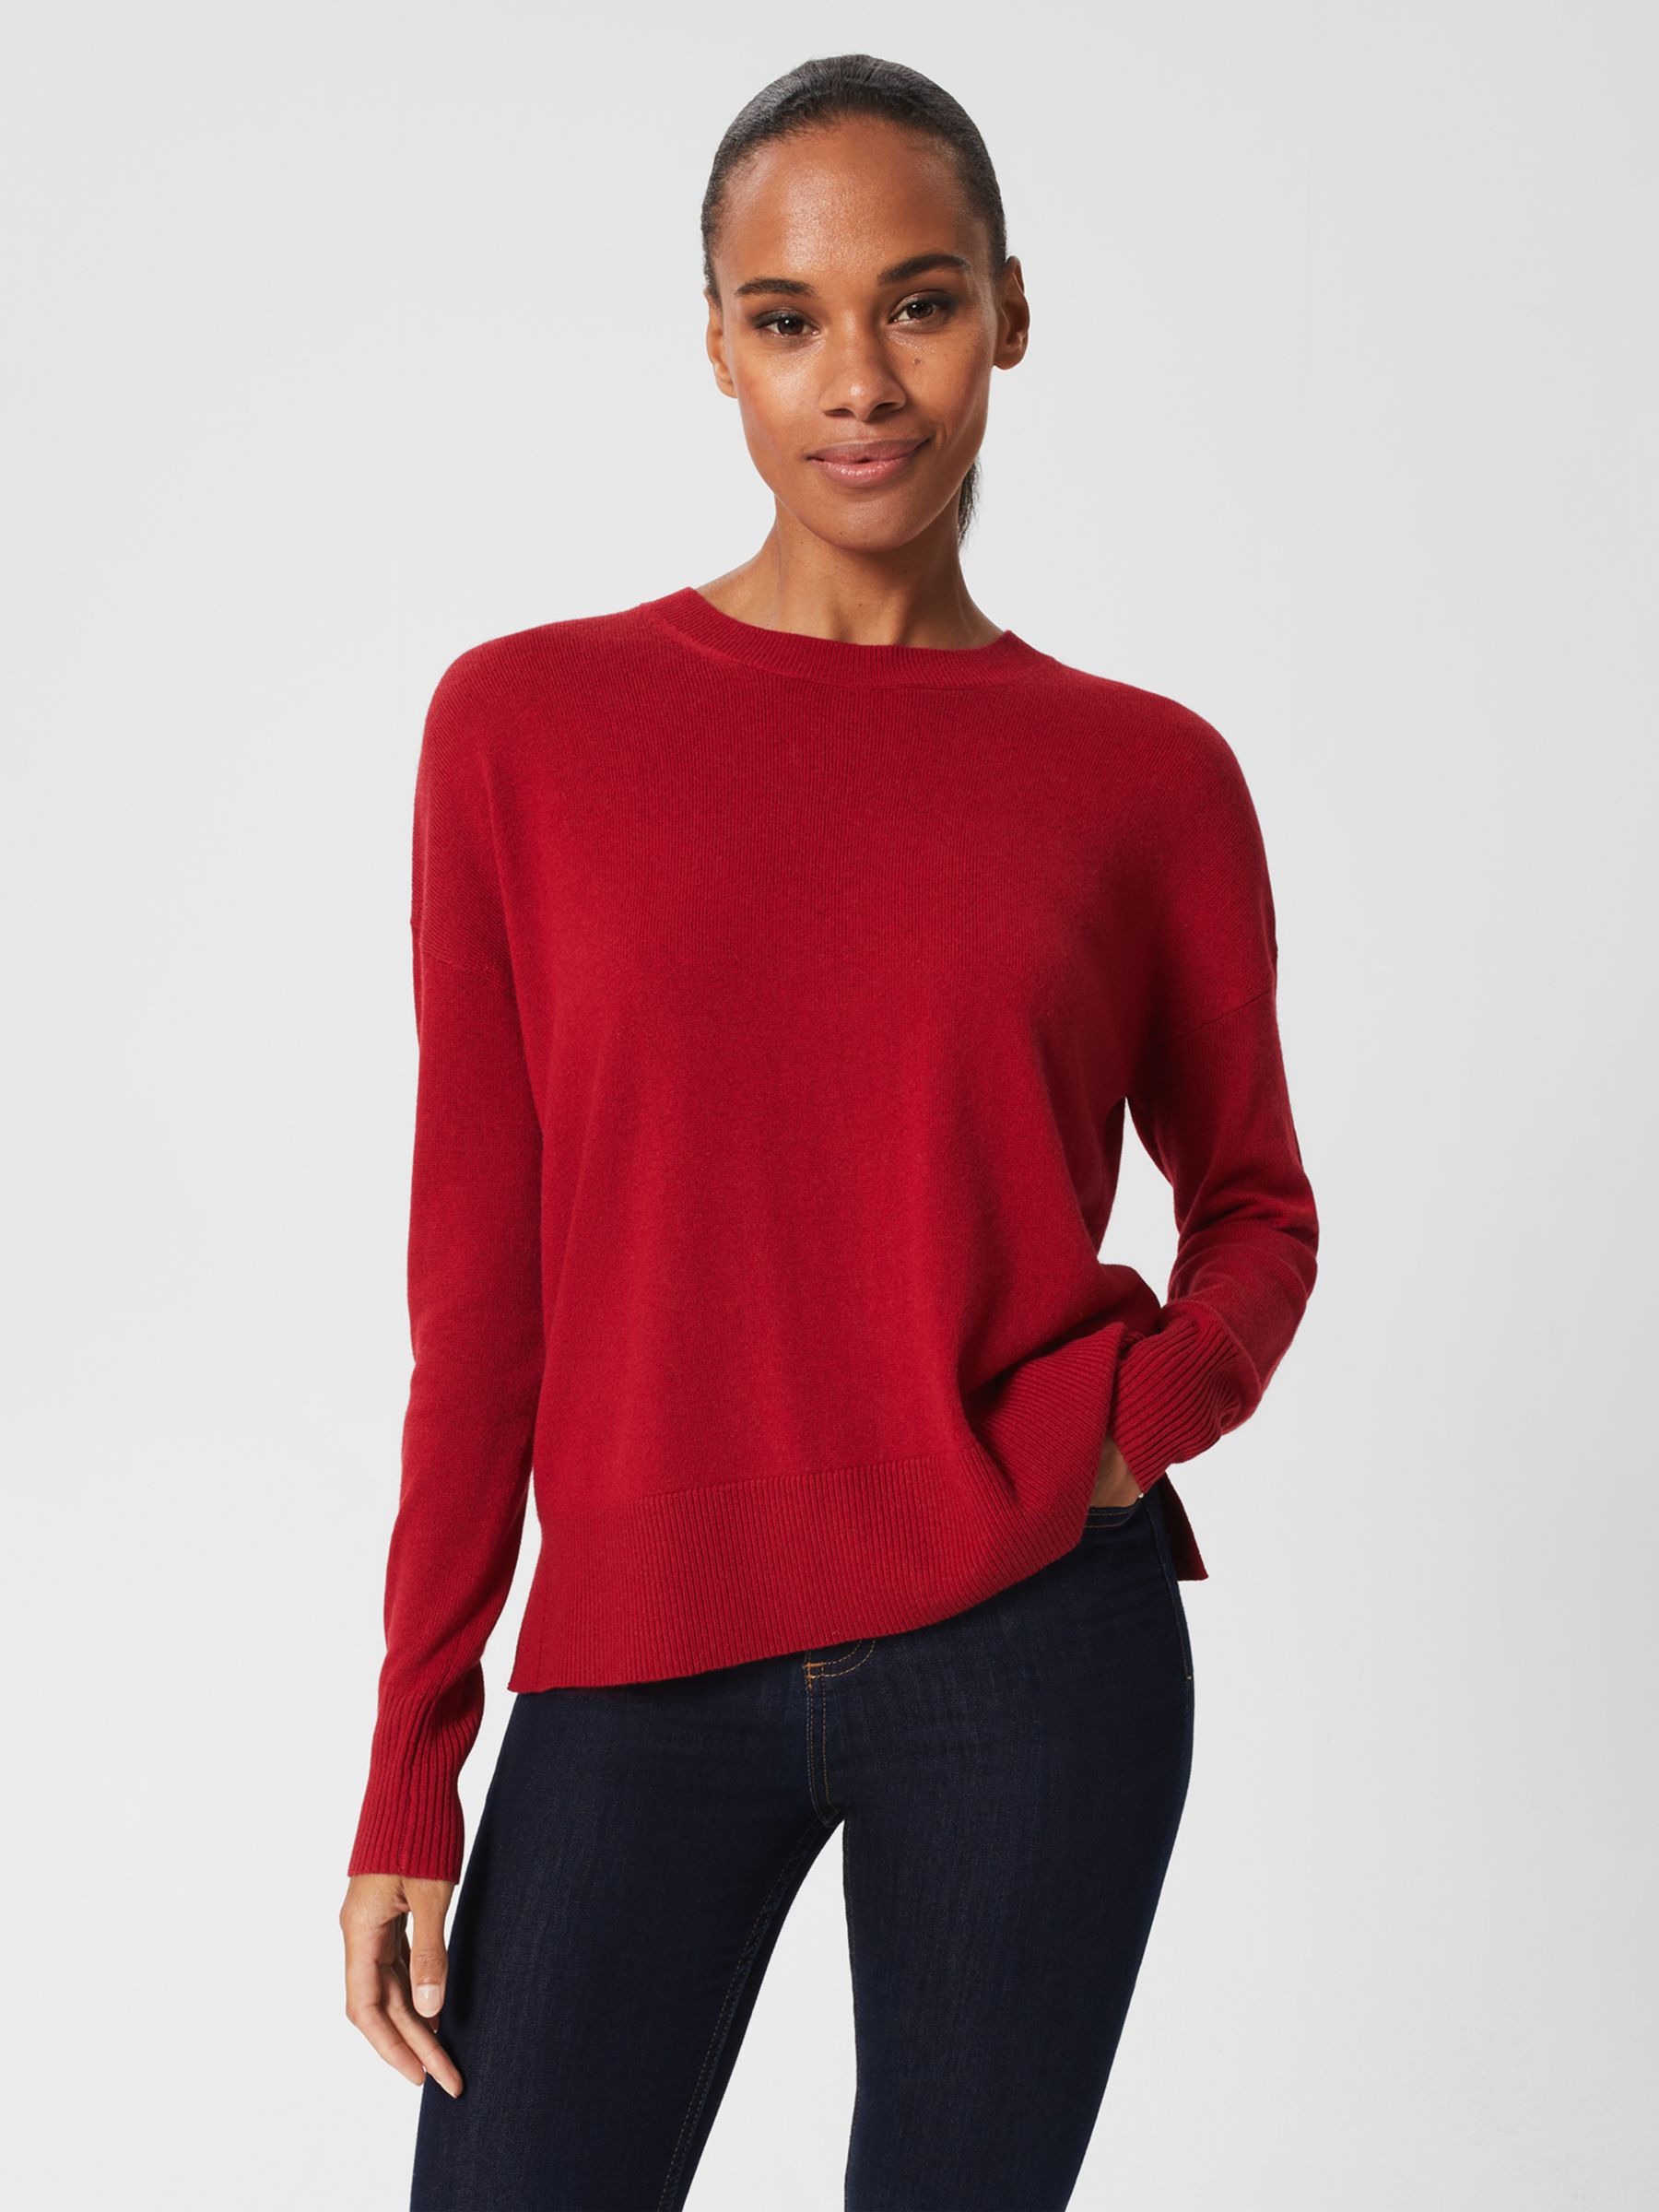 Hobbs Lydia Button Back Jumper, Red at John Lewis & Partners